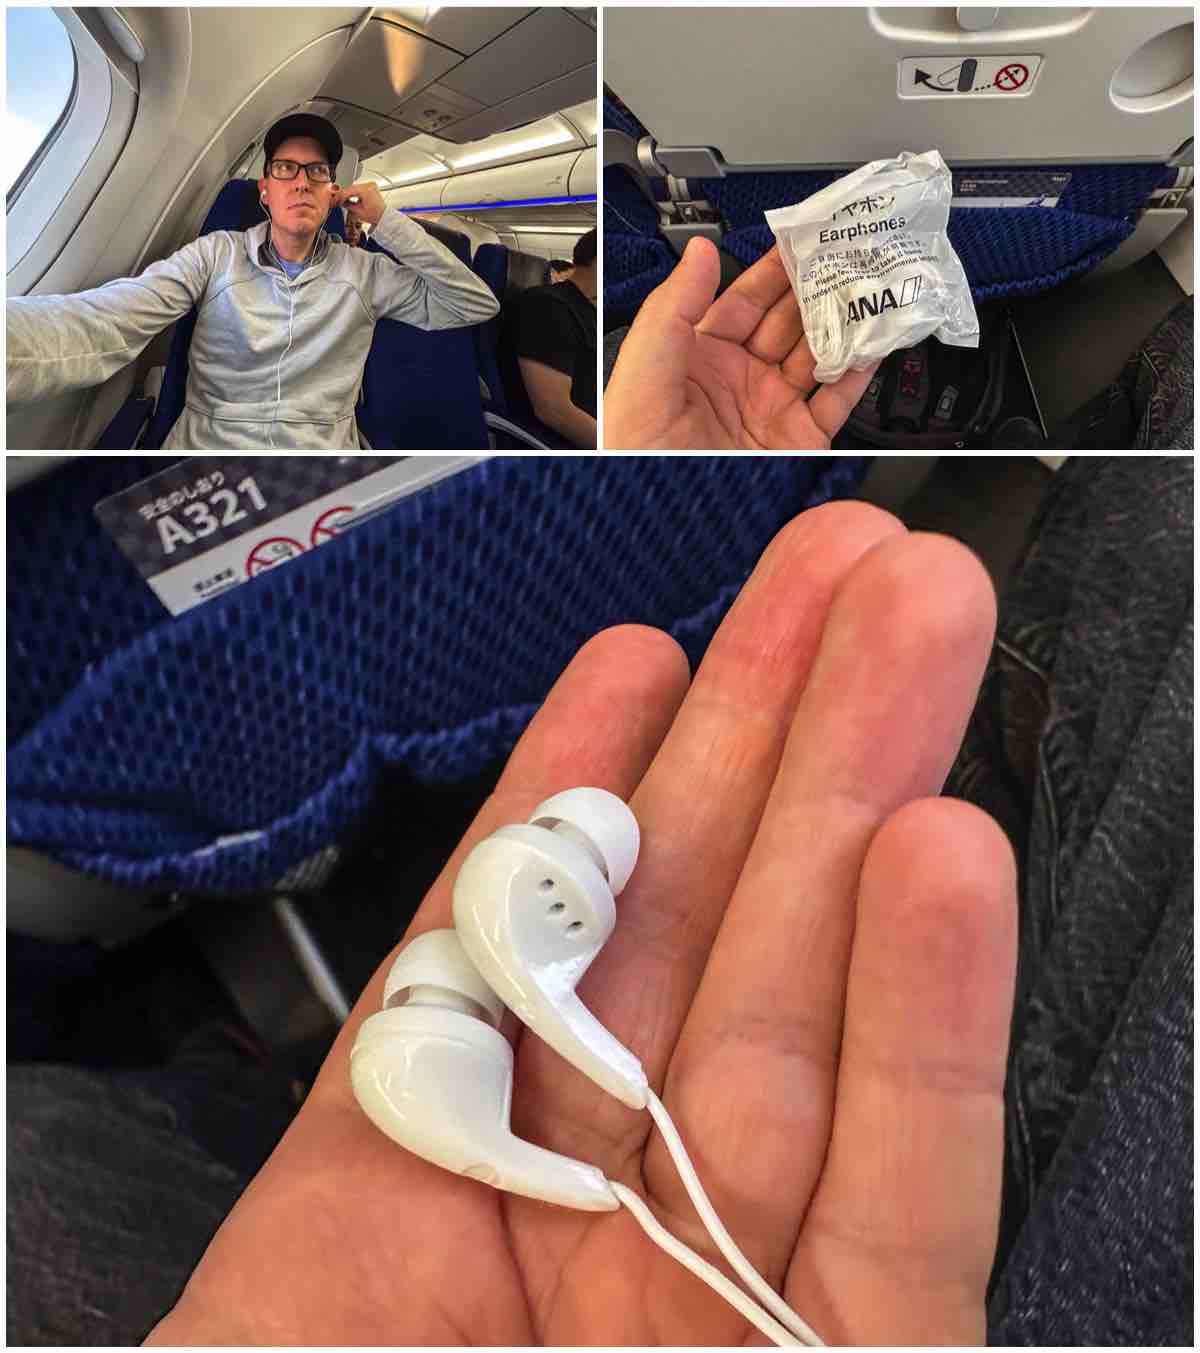 ANA A321neo economy complimentary earbuds